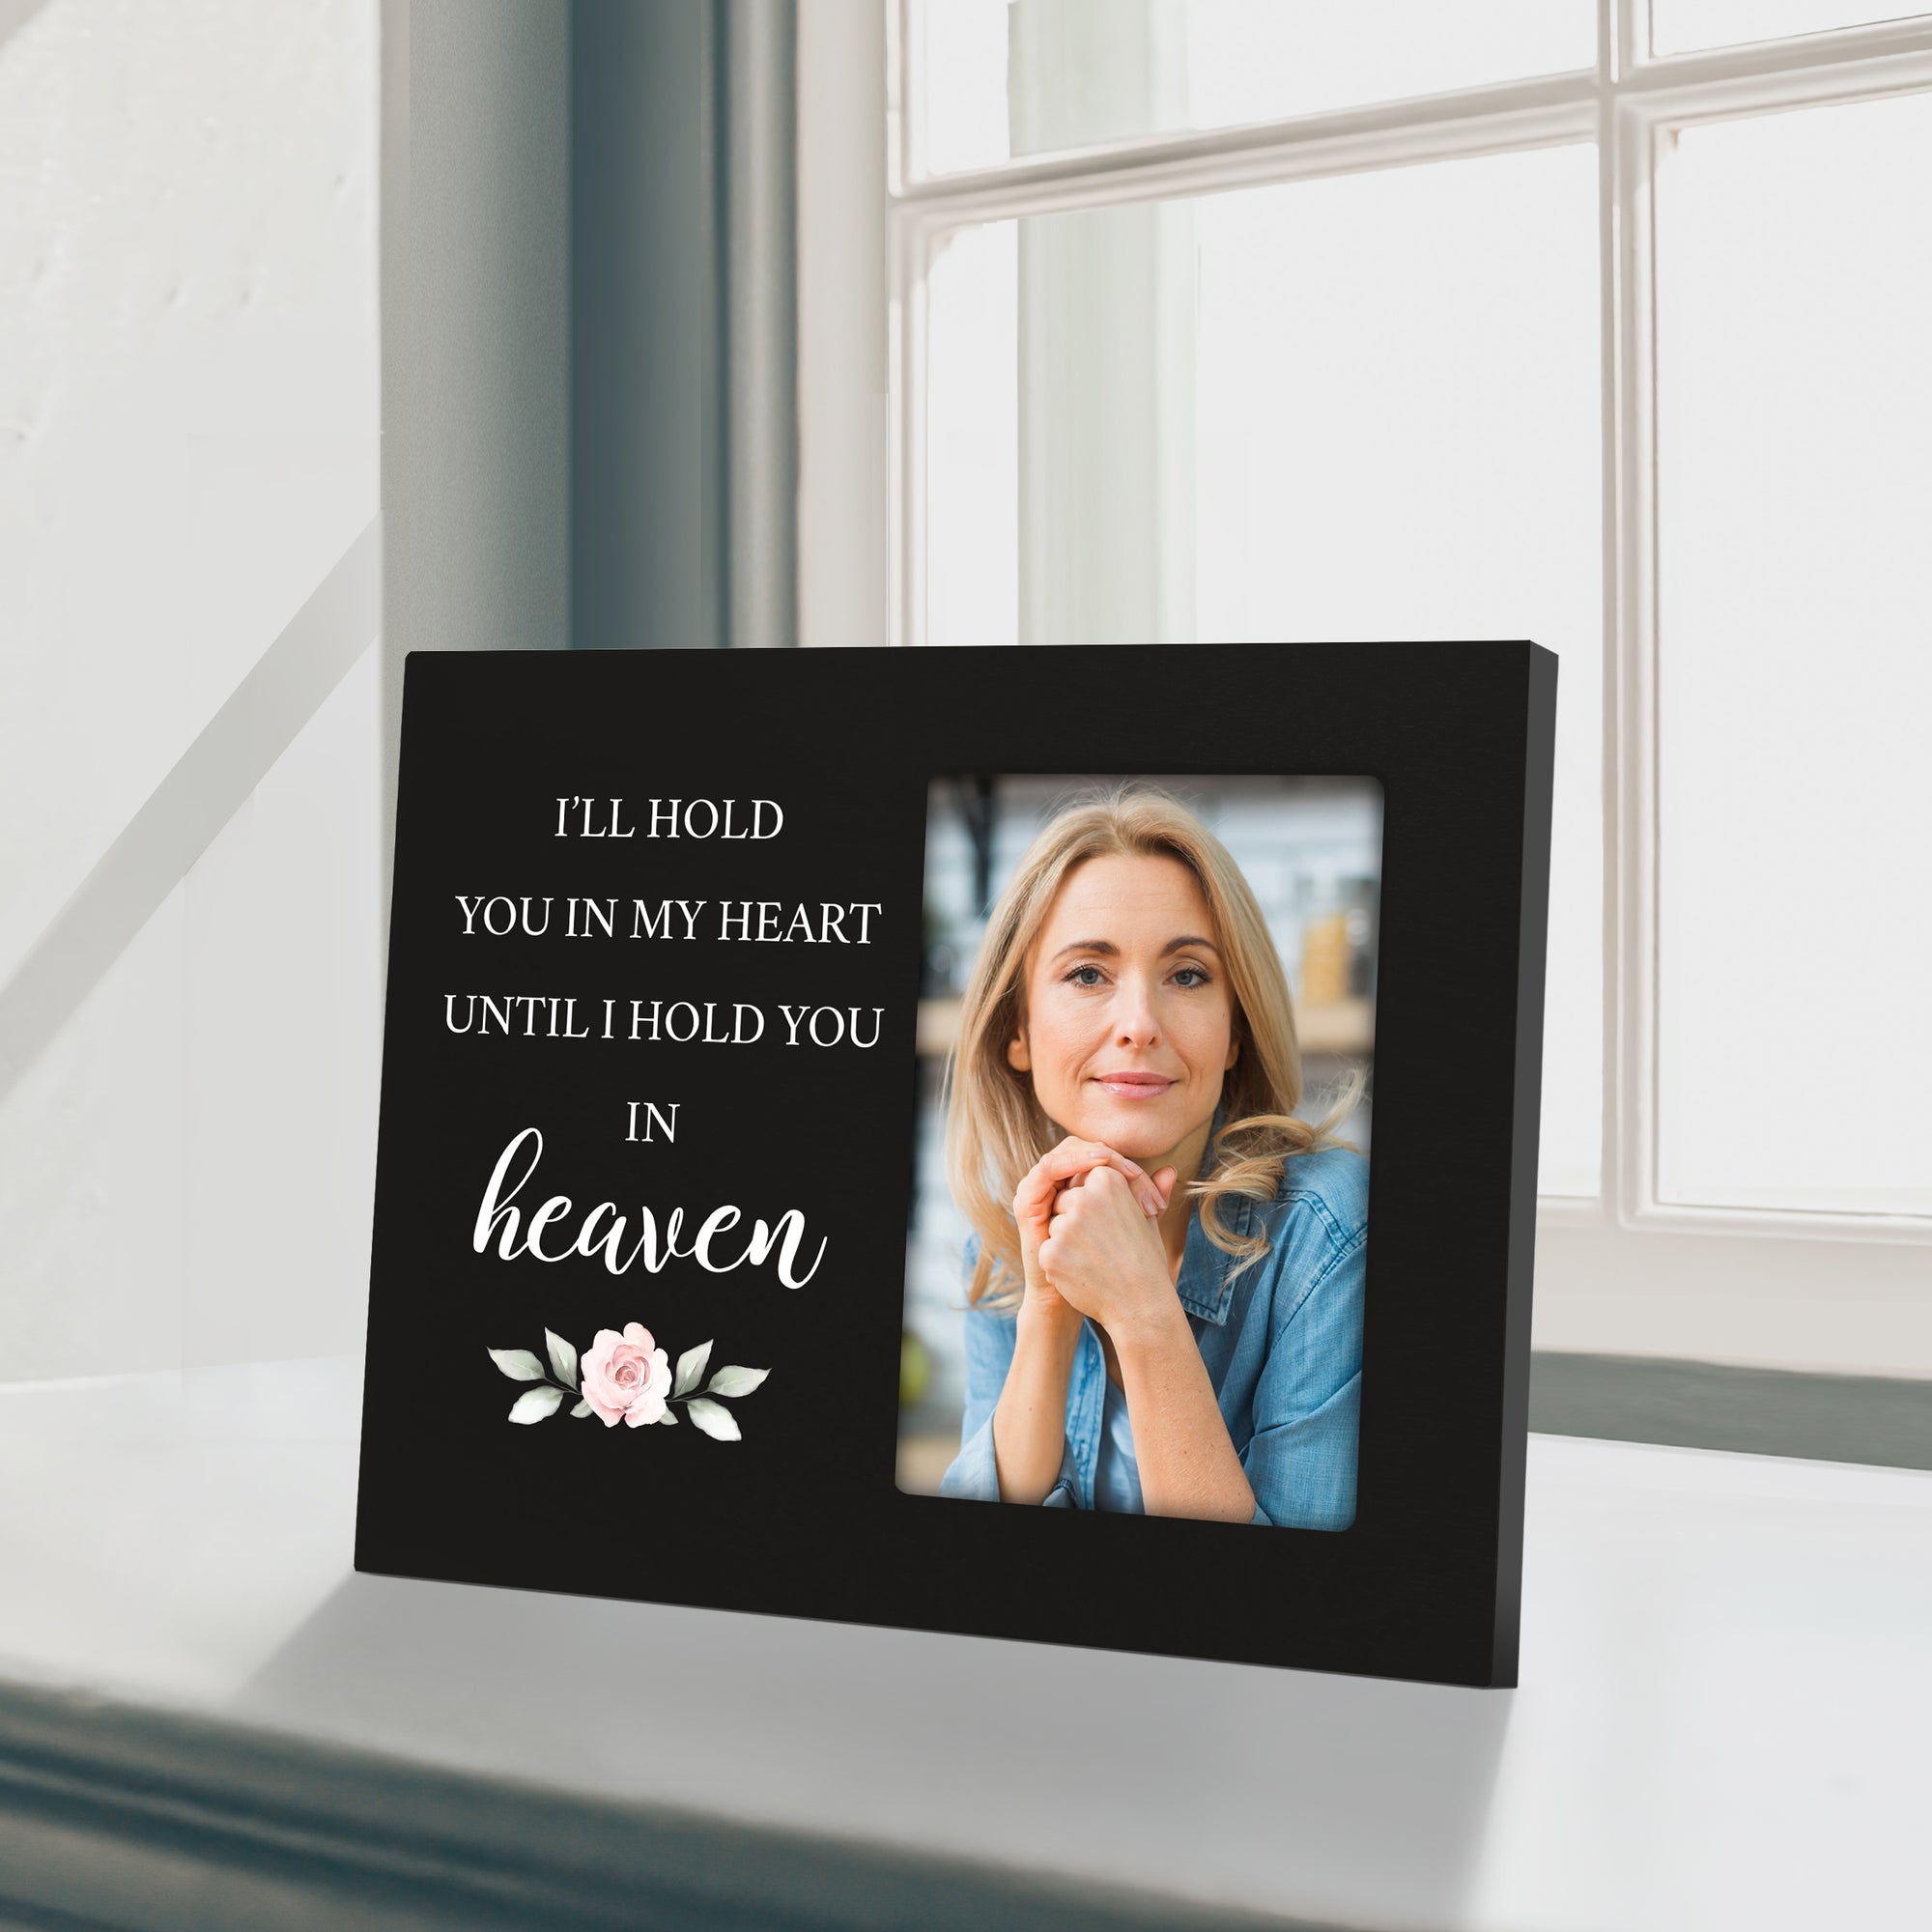 The frames are perfect for displaying photos of loved ones, pets, or special memories